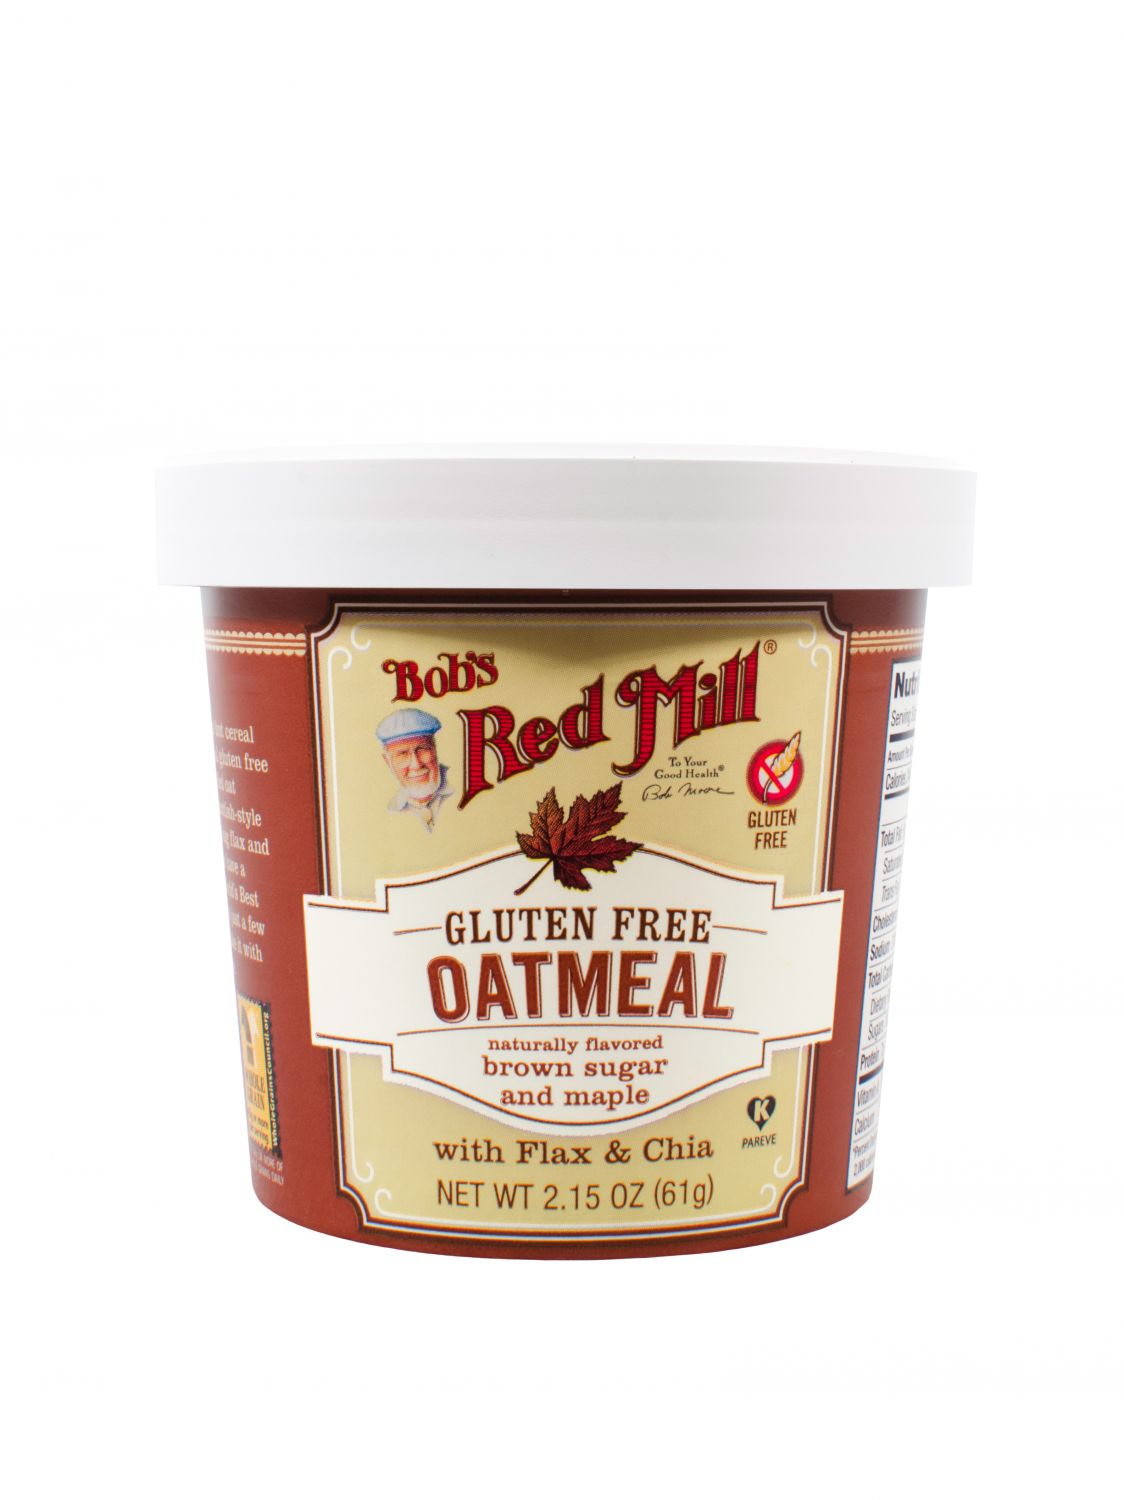 Bob's Red Mill Oatmeal Cup Brown Sugar & Maple (61g)